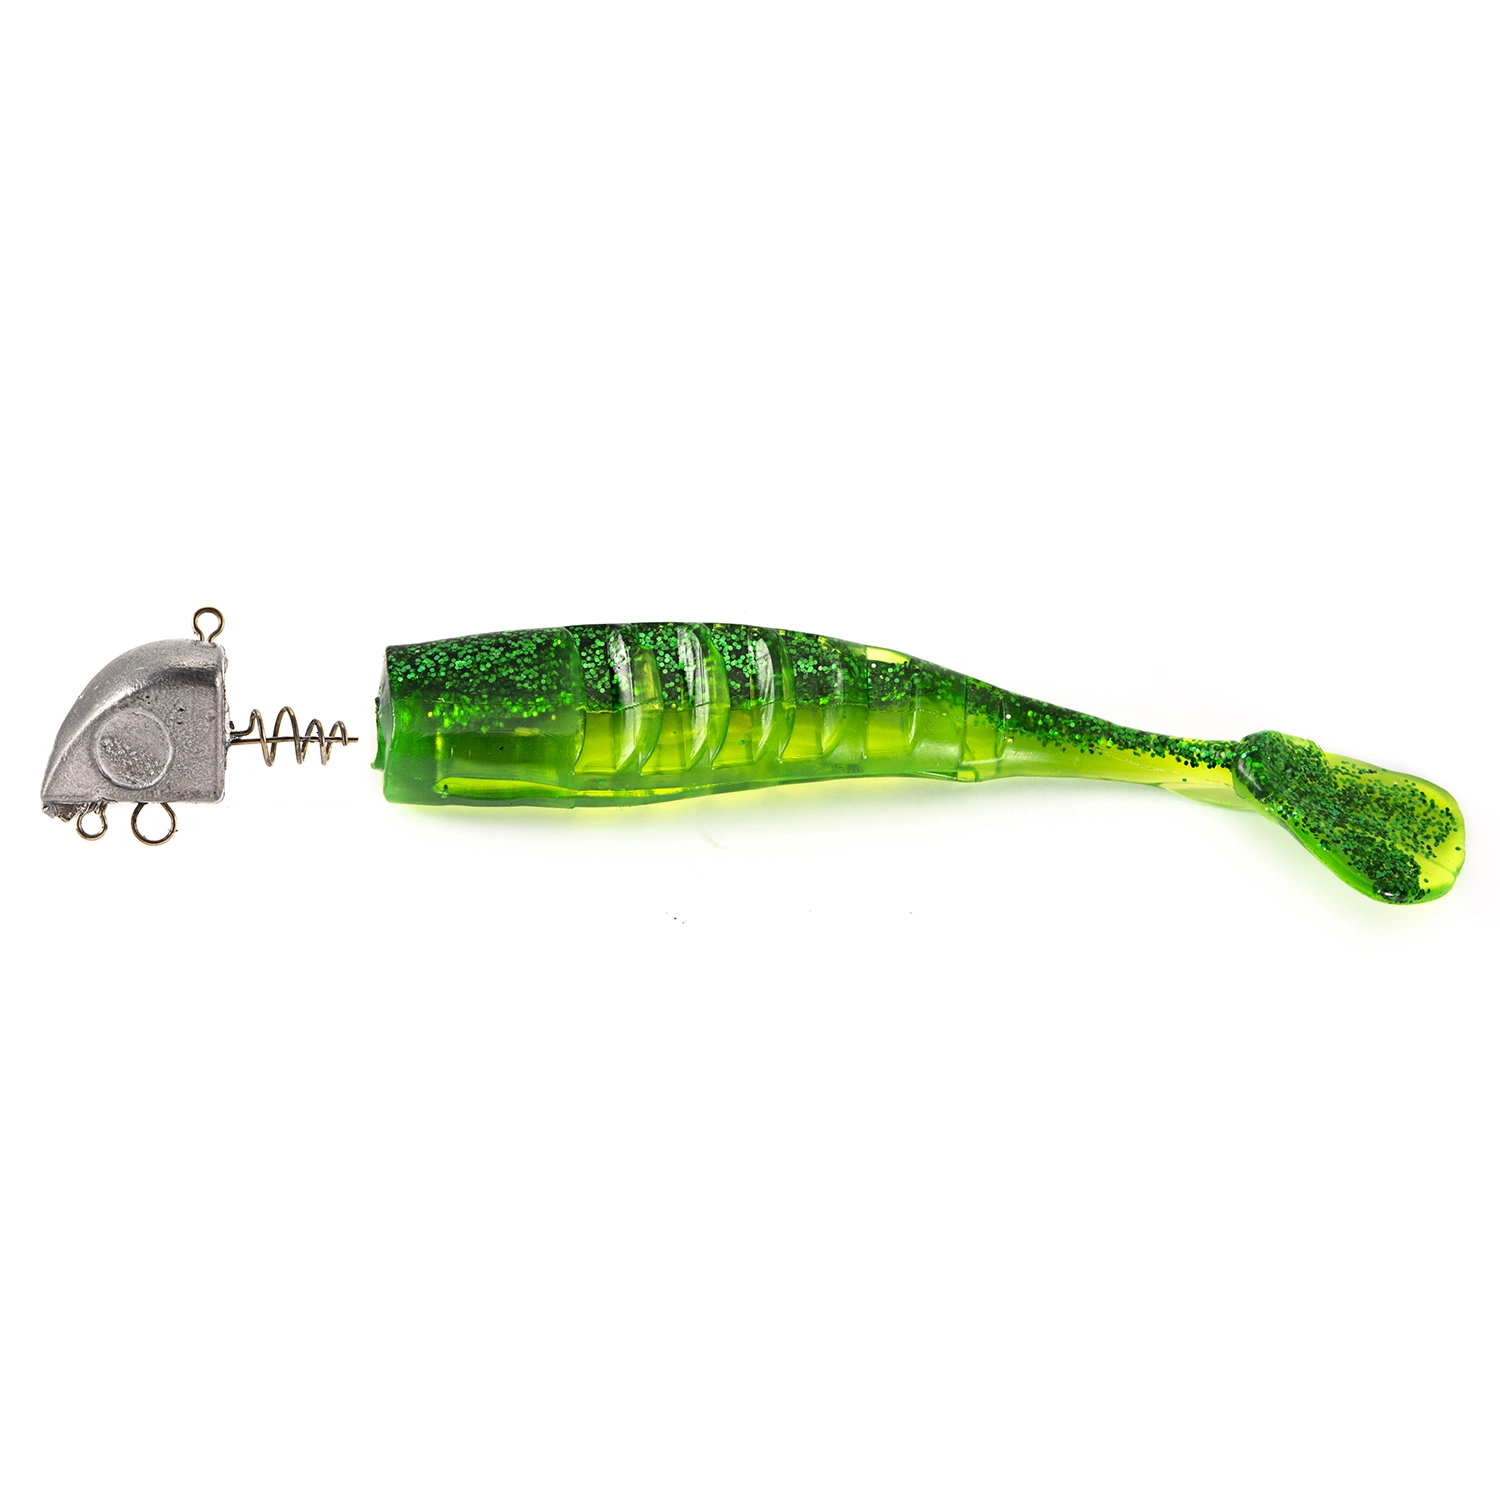 Fish Head Lead Weight Fishing Lure Jig Sliver Weight Fishing Accessory